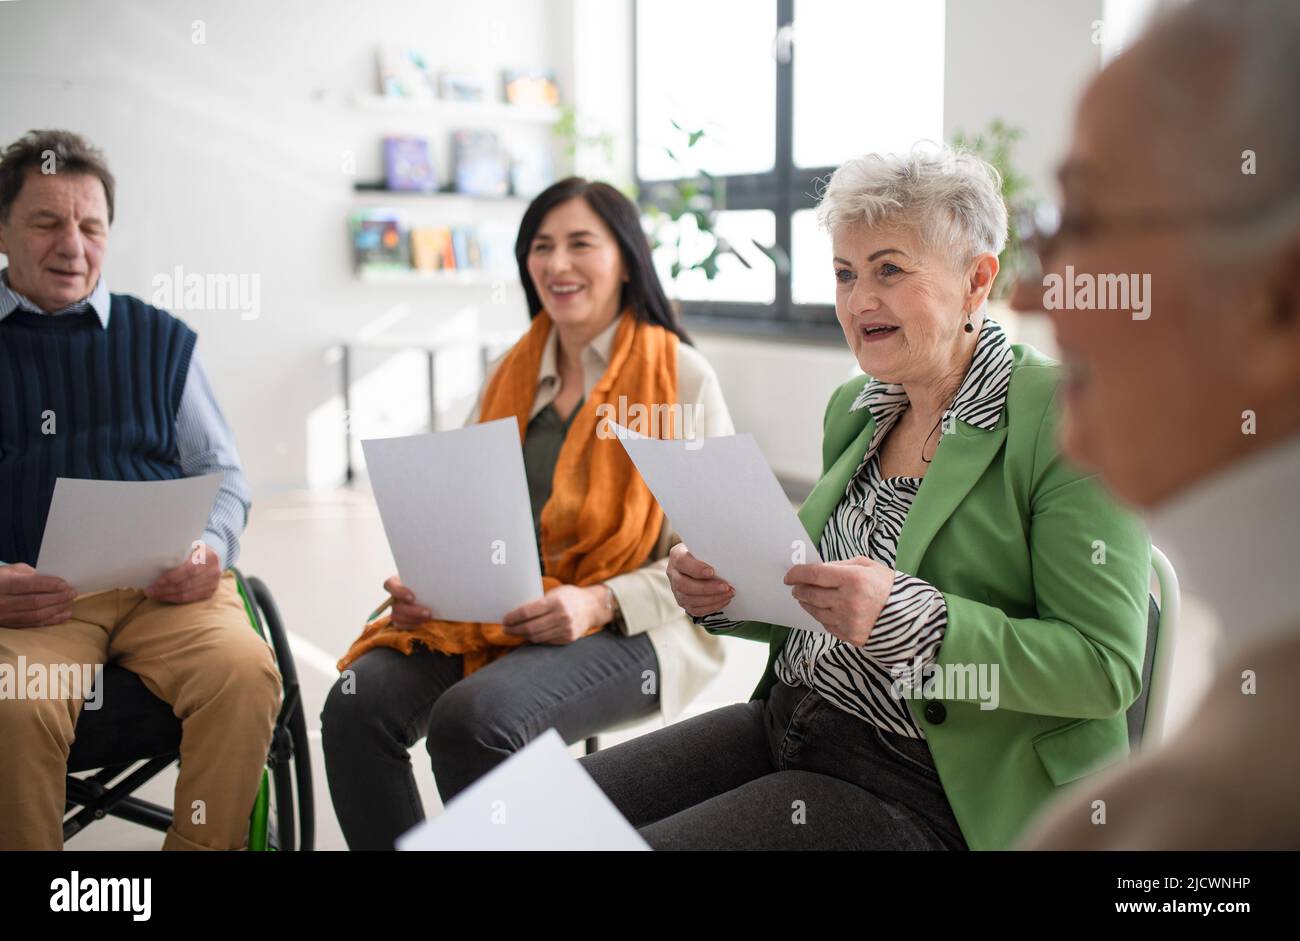 Group of seniors with singing together at choir rehearsal. Stock Photo